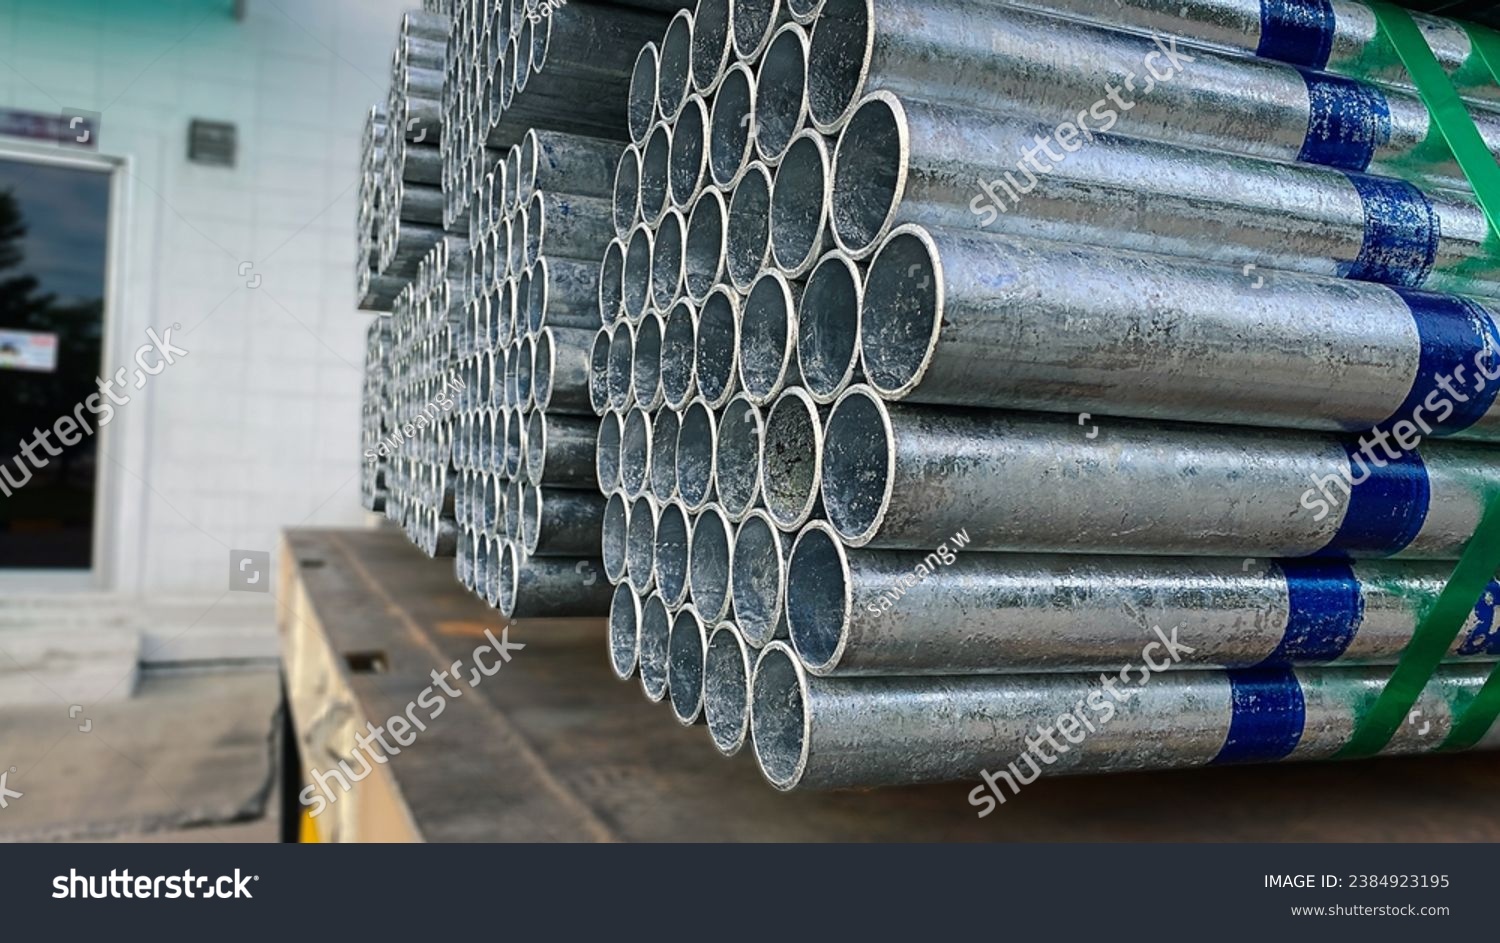 plumbing steel,high quality Galvanized steel pipe or Aluminum and chrome stainless pipes in stack waiting for shipment in warehouse #2384923195